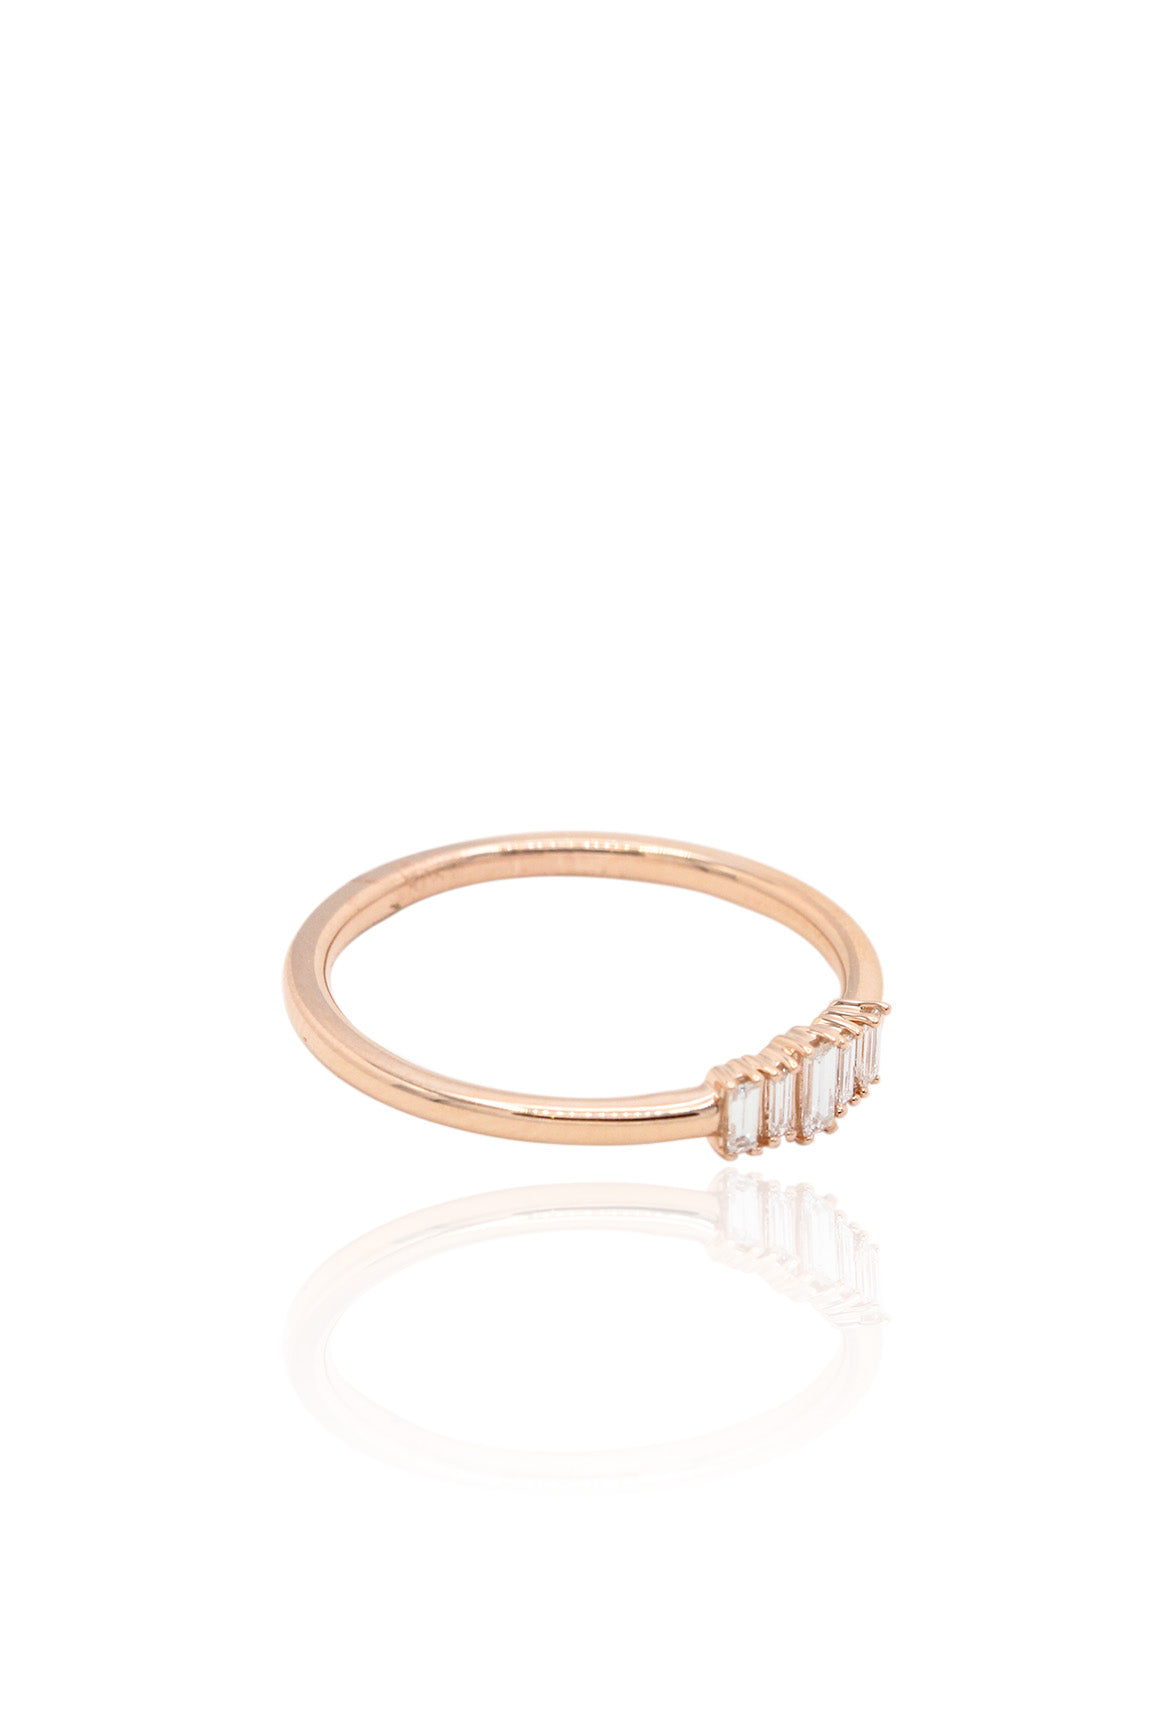 Kannyn January Jewelry Izzy Ring in Rose Gold